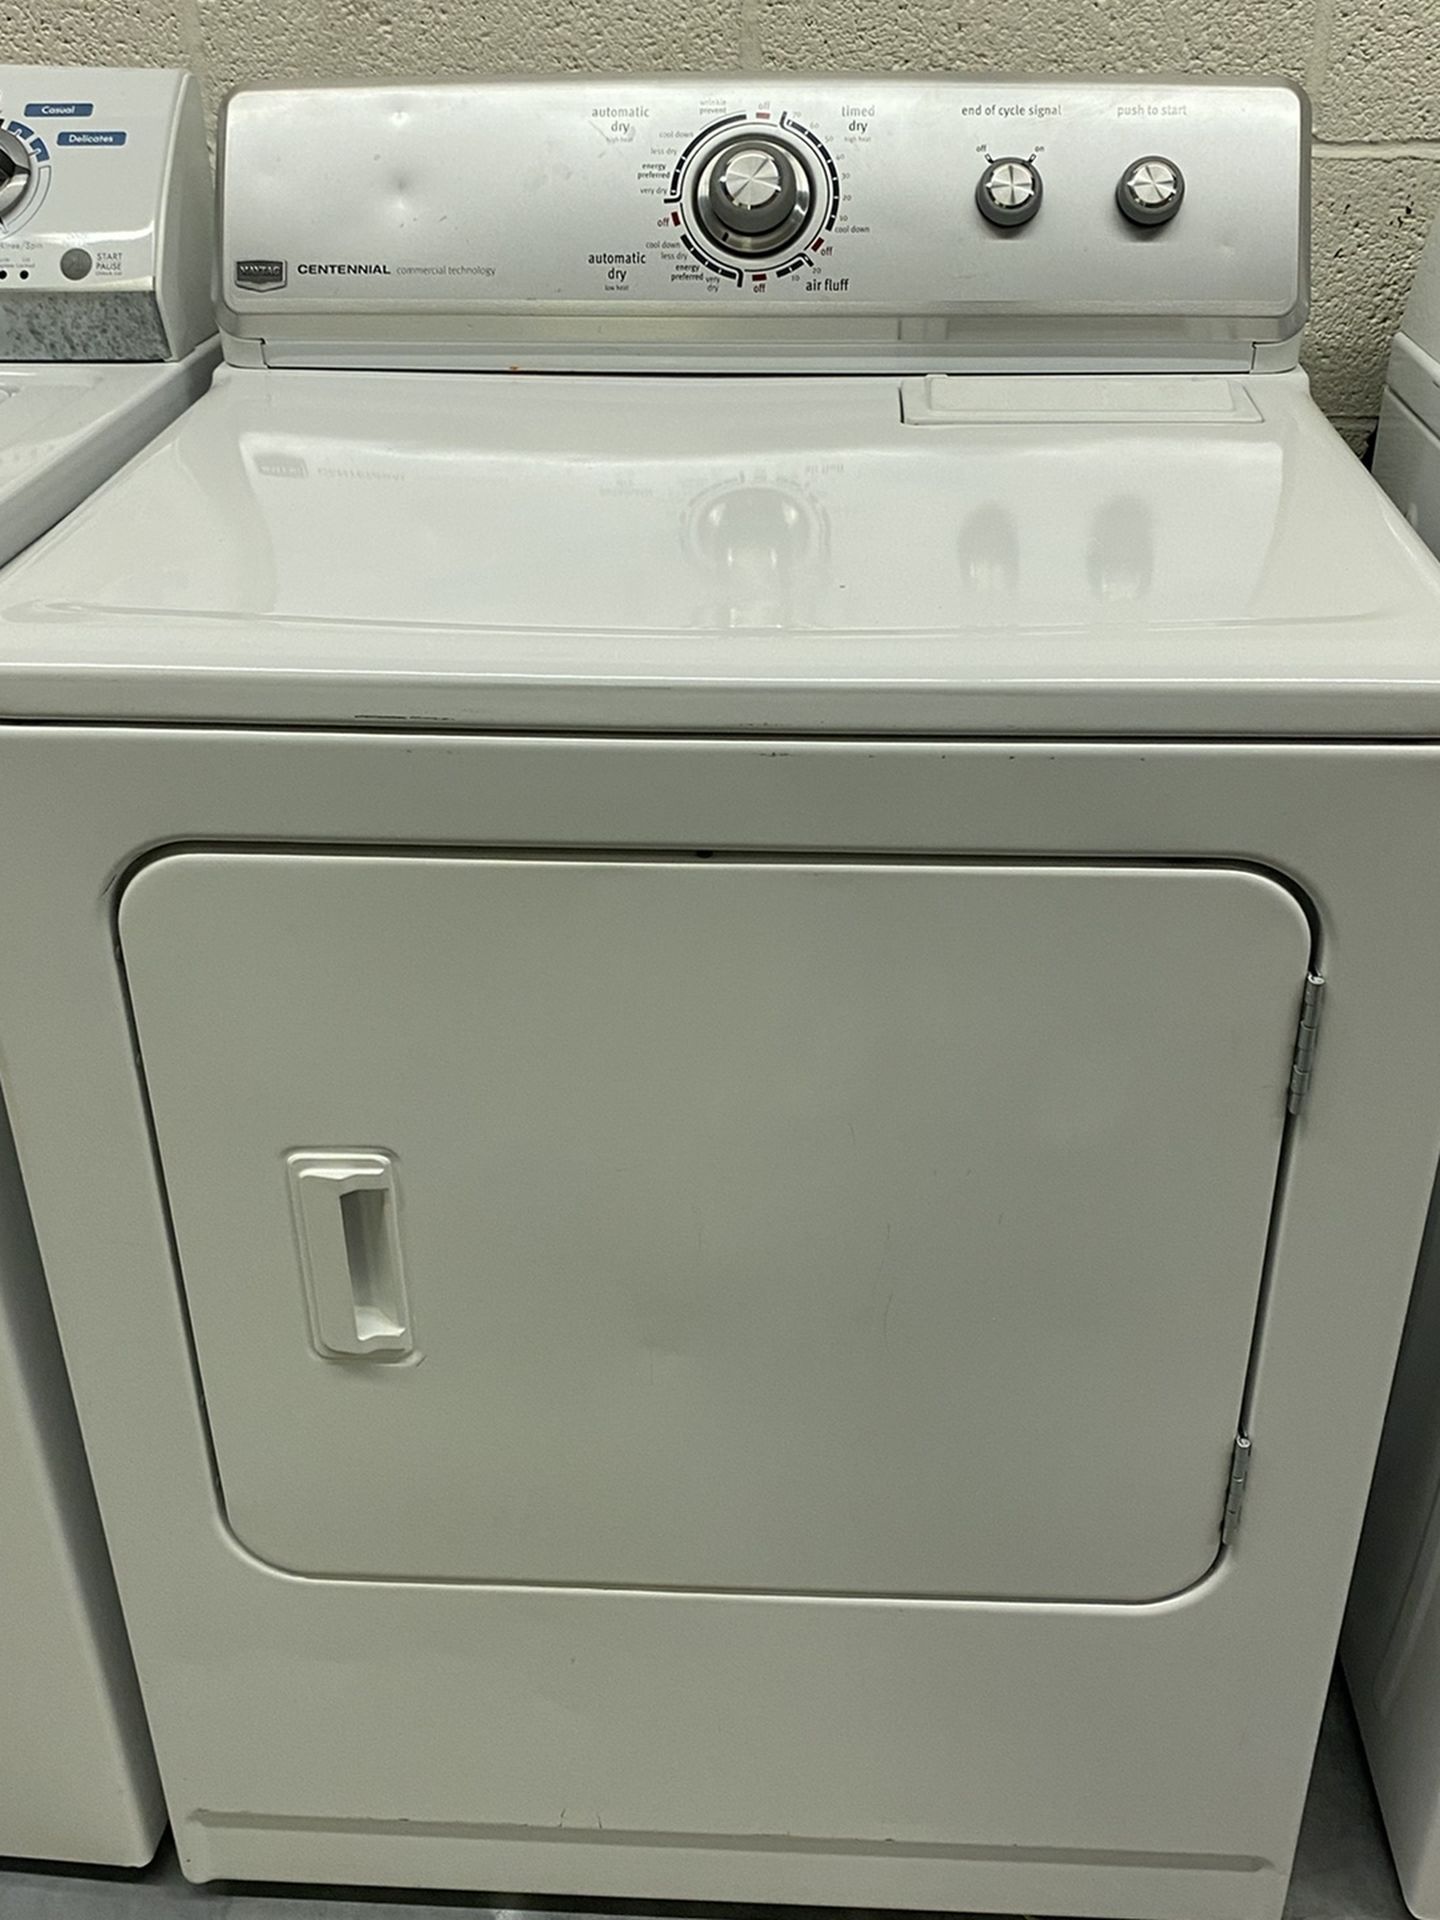 Maytag Centennial MCT Electric Dryer -4 month Warranty